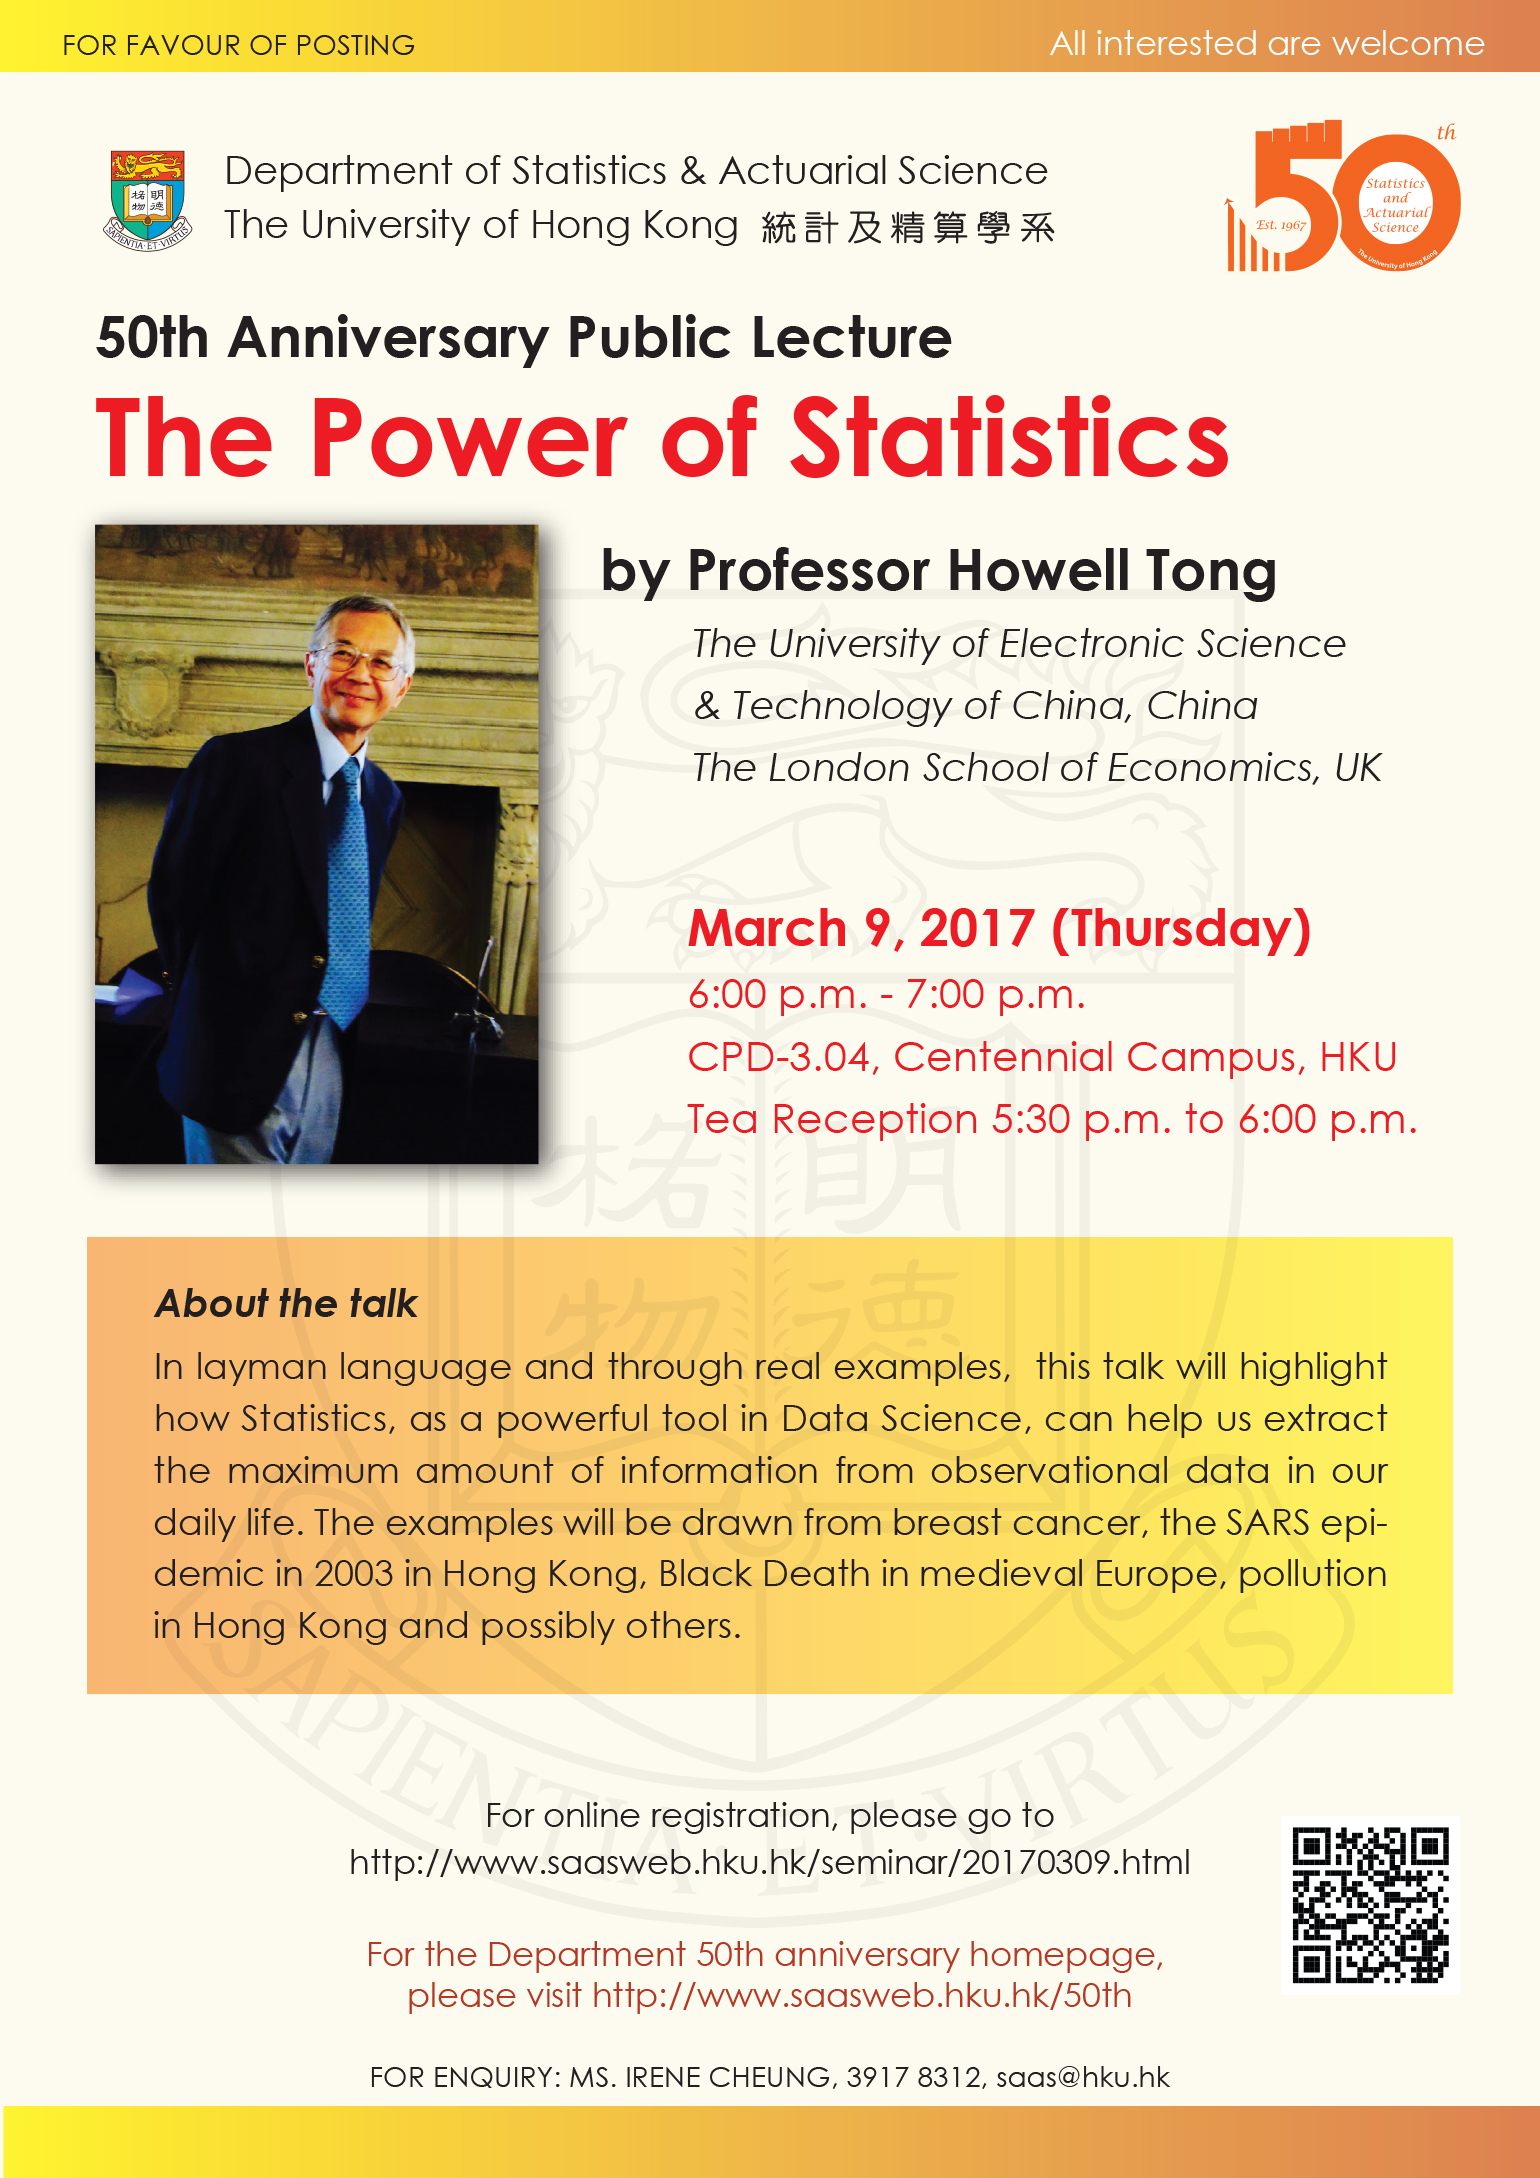 50th Anniversary Public Lecture on 'The Power of Statistics' by Professor Howell Tong on March 9, 2017